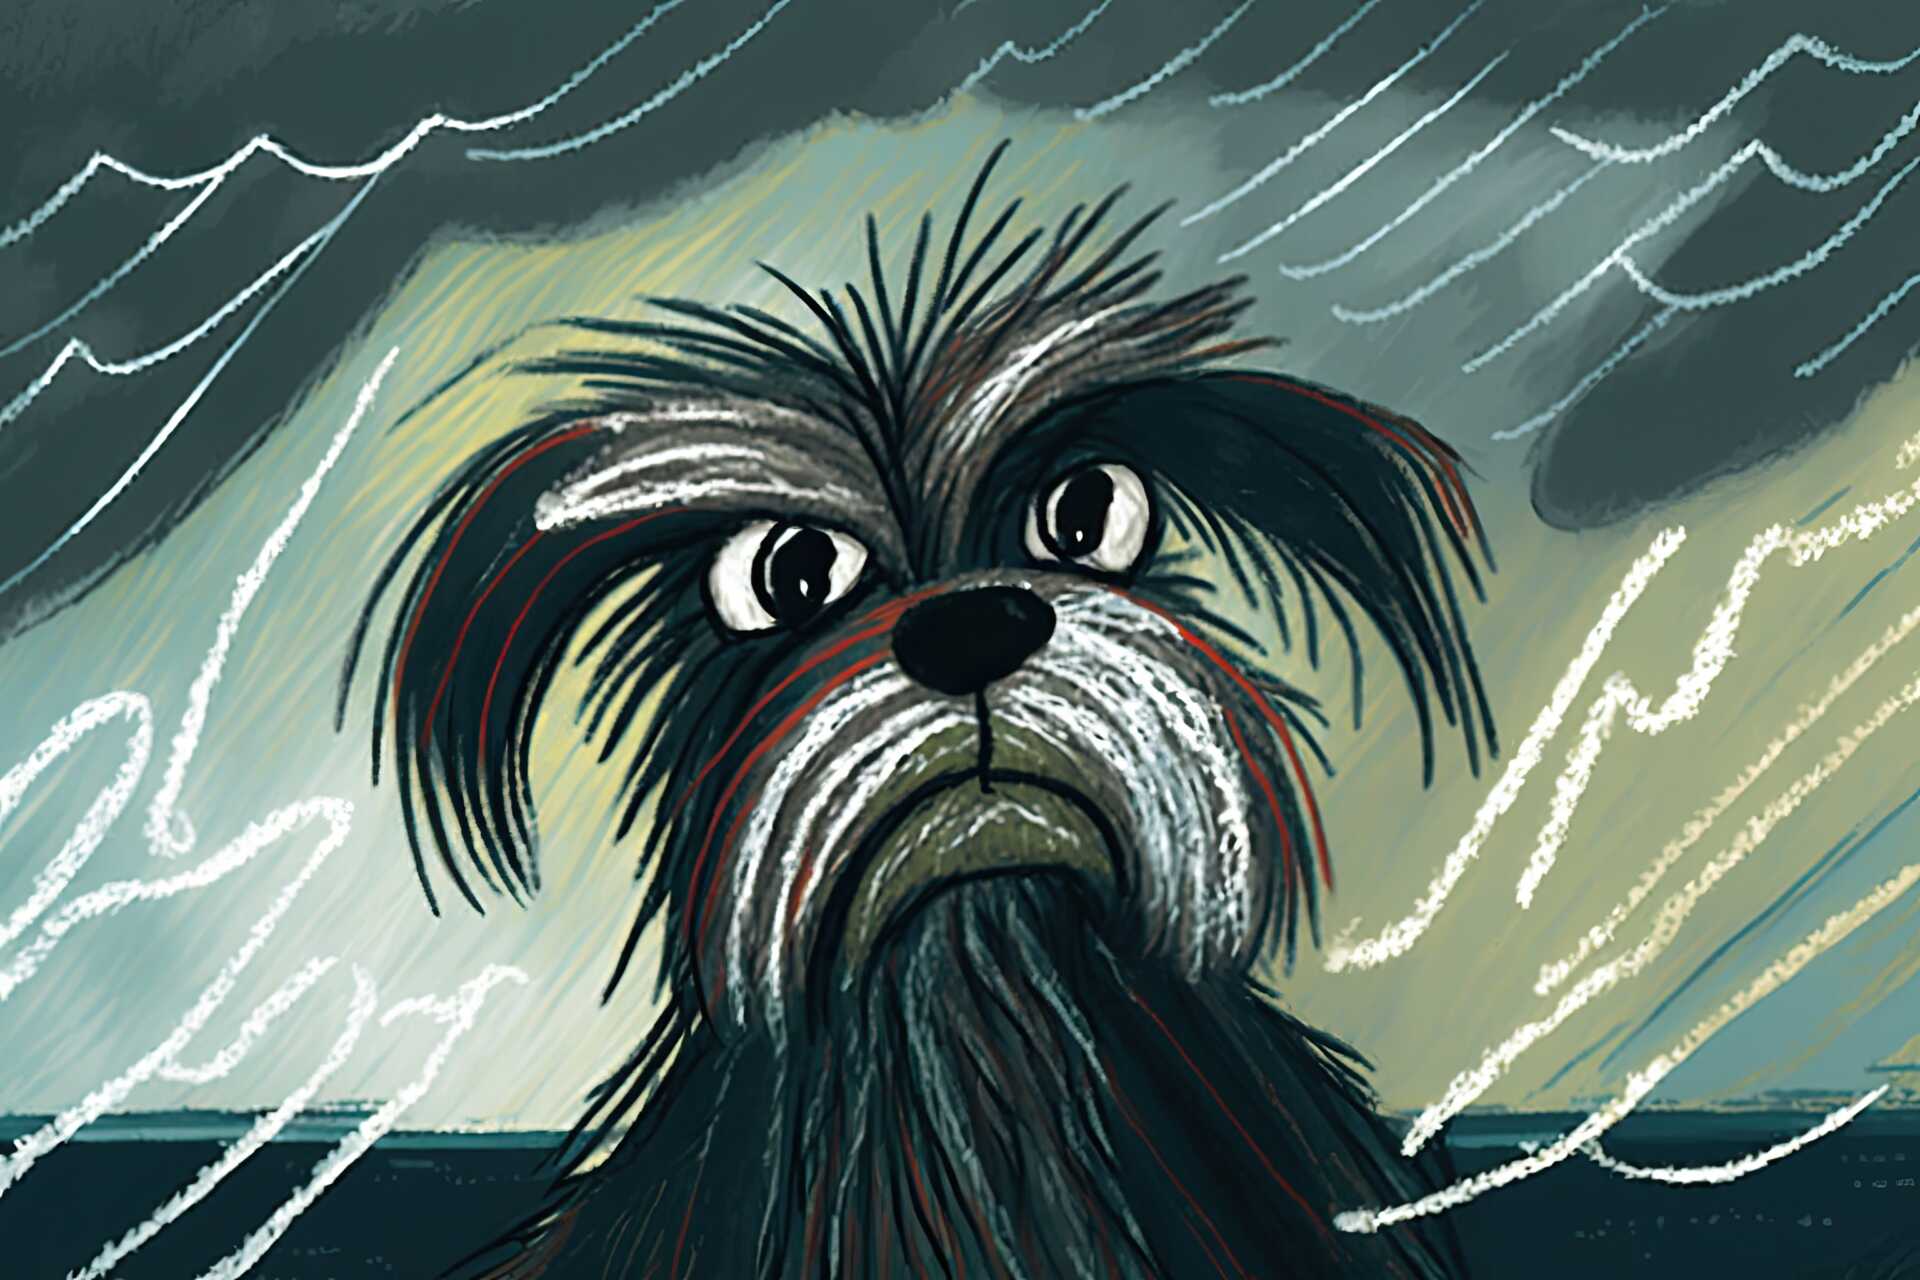 A LhasaLife illustration of an angry looking dog